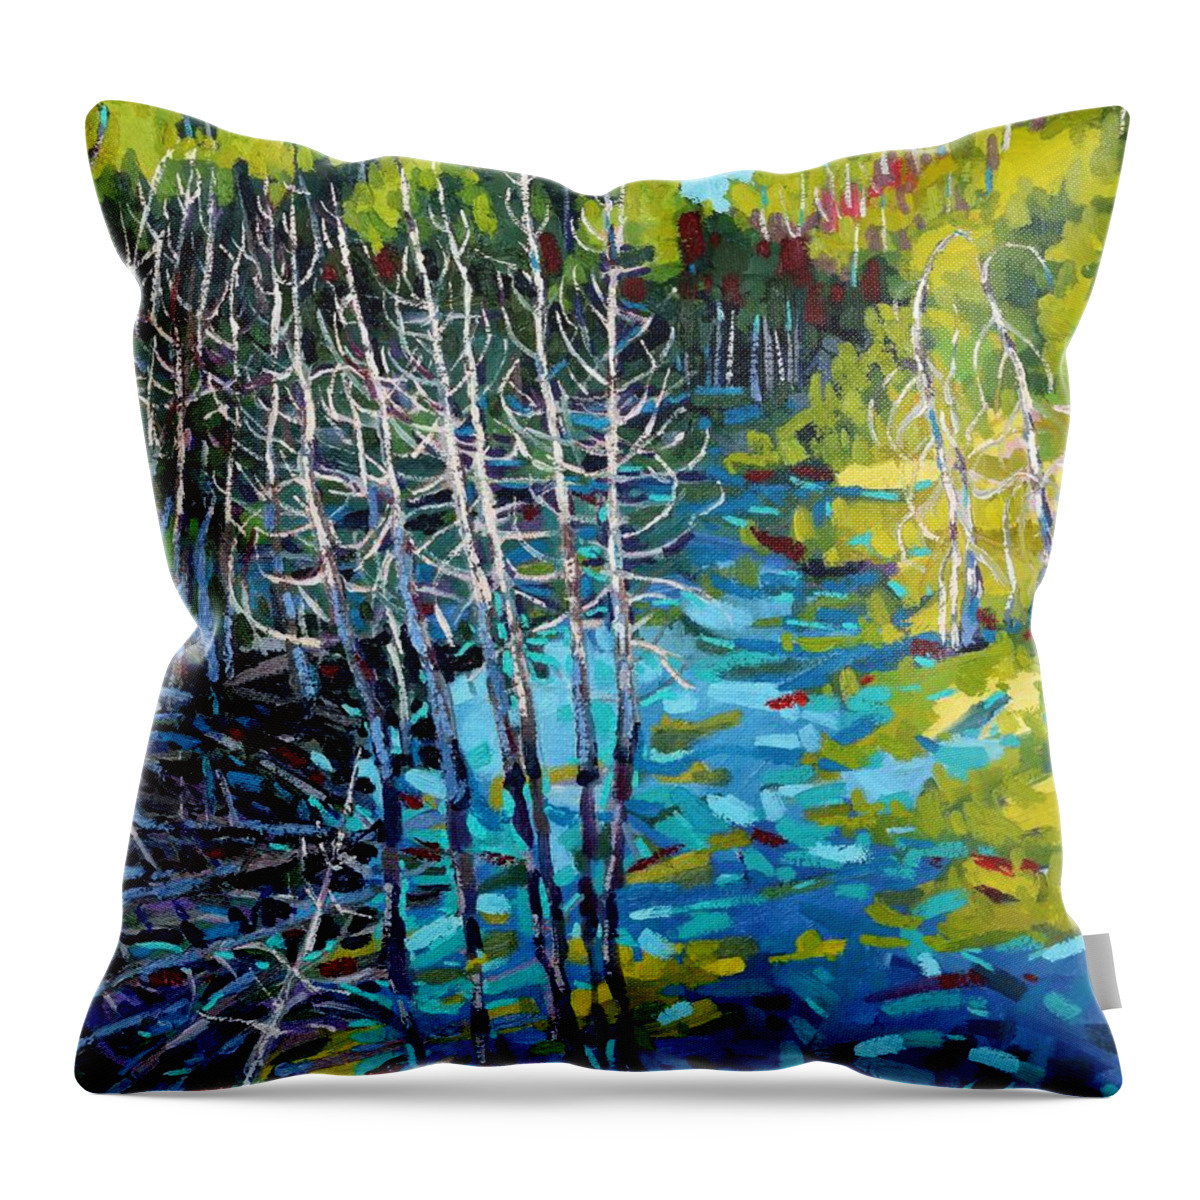 Swamp Throw Pillow featuring the painting Sunrise Swamp by Phil Chadwick